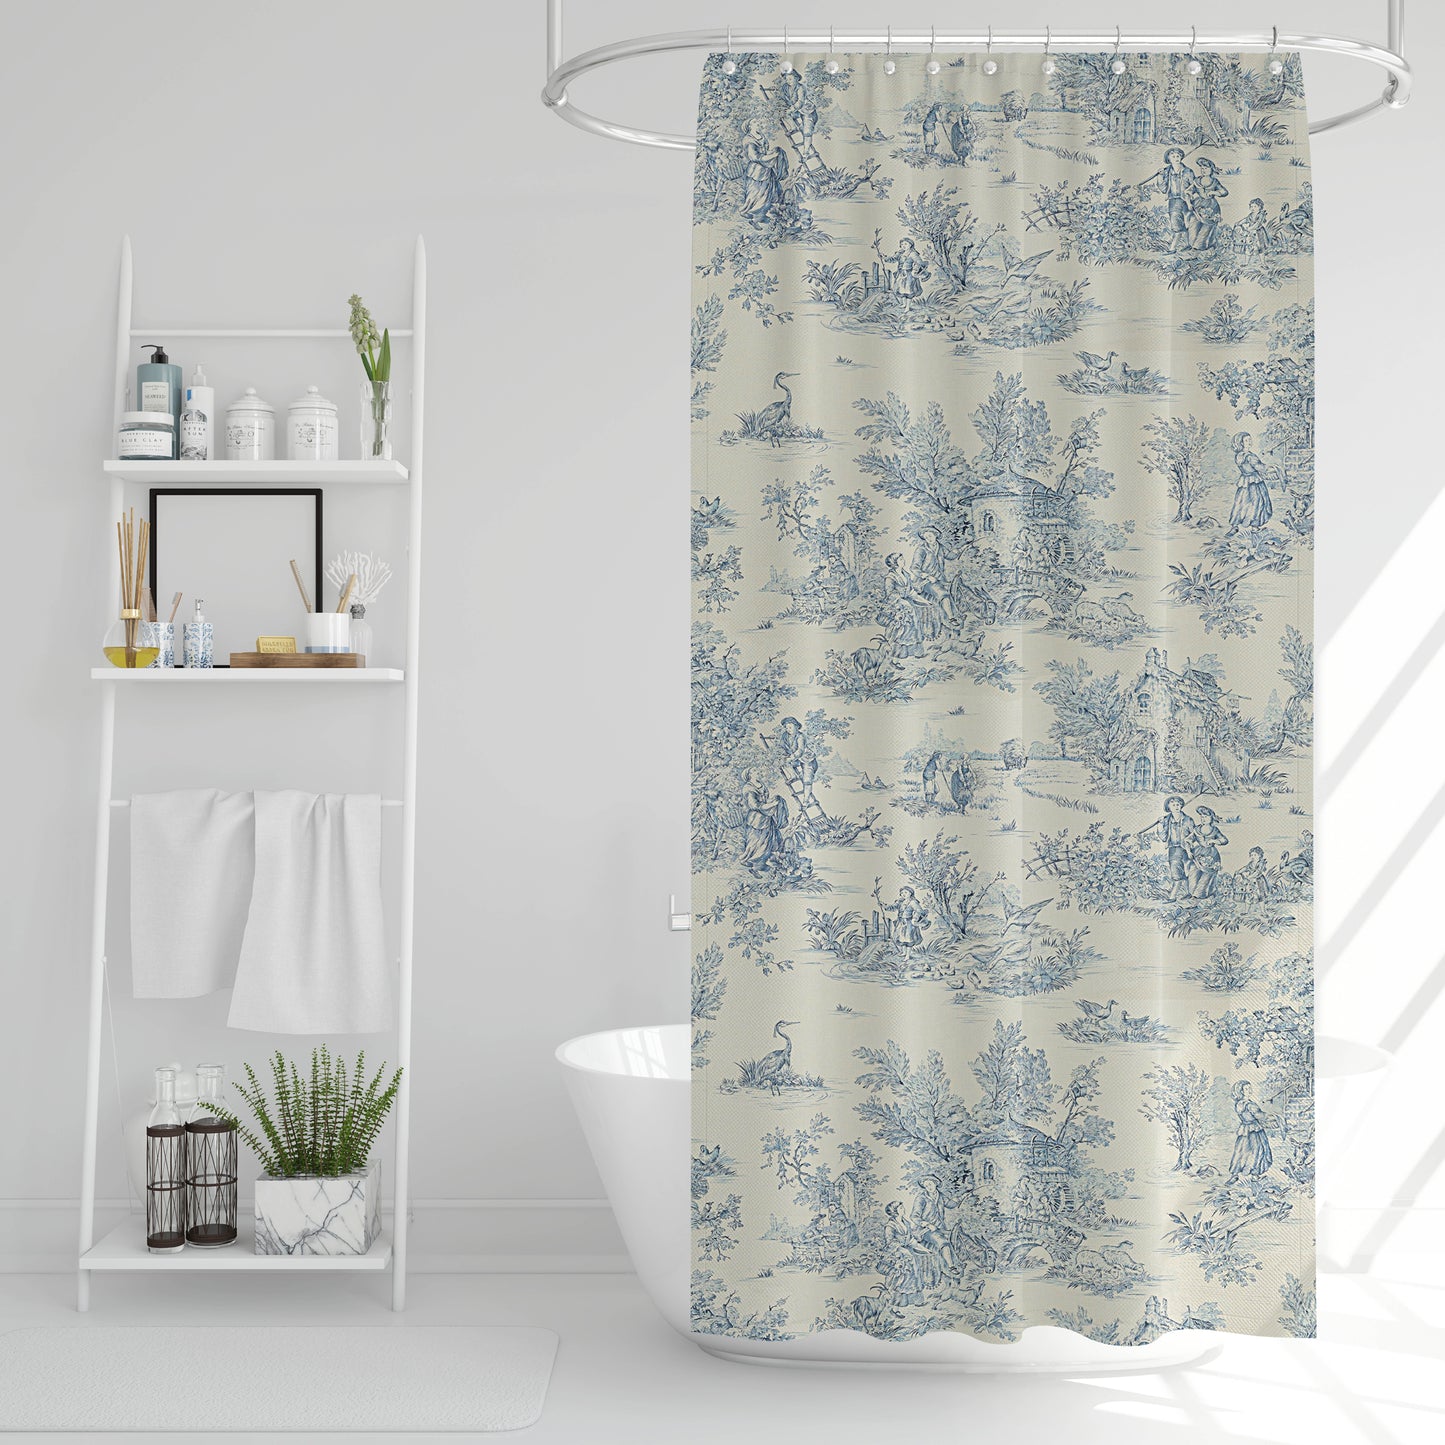 Shower Curtain in Pastorale #2 Blue on Cream French Country Toile